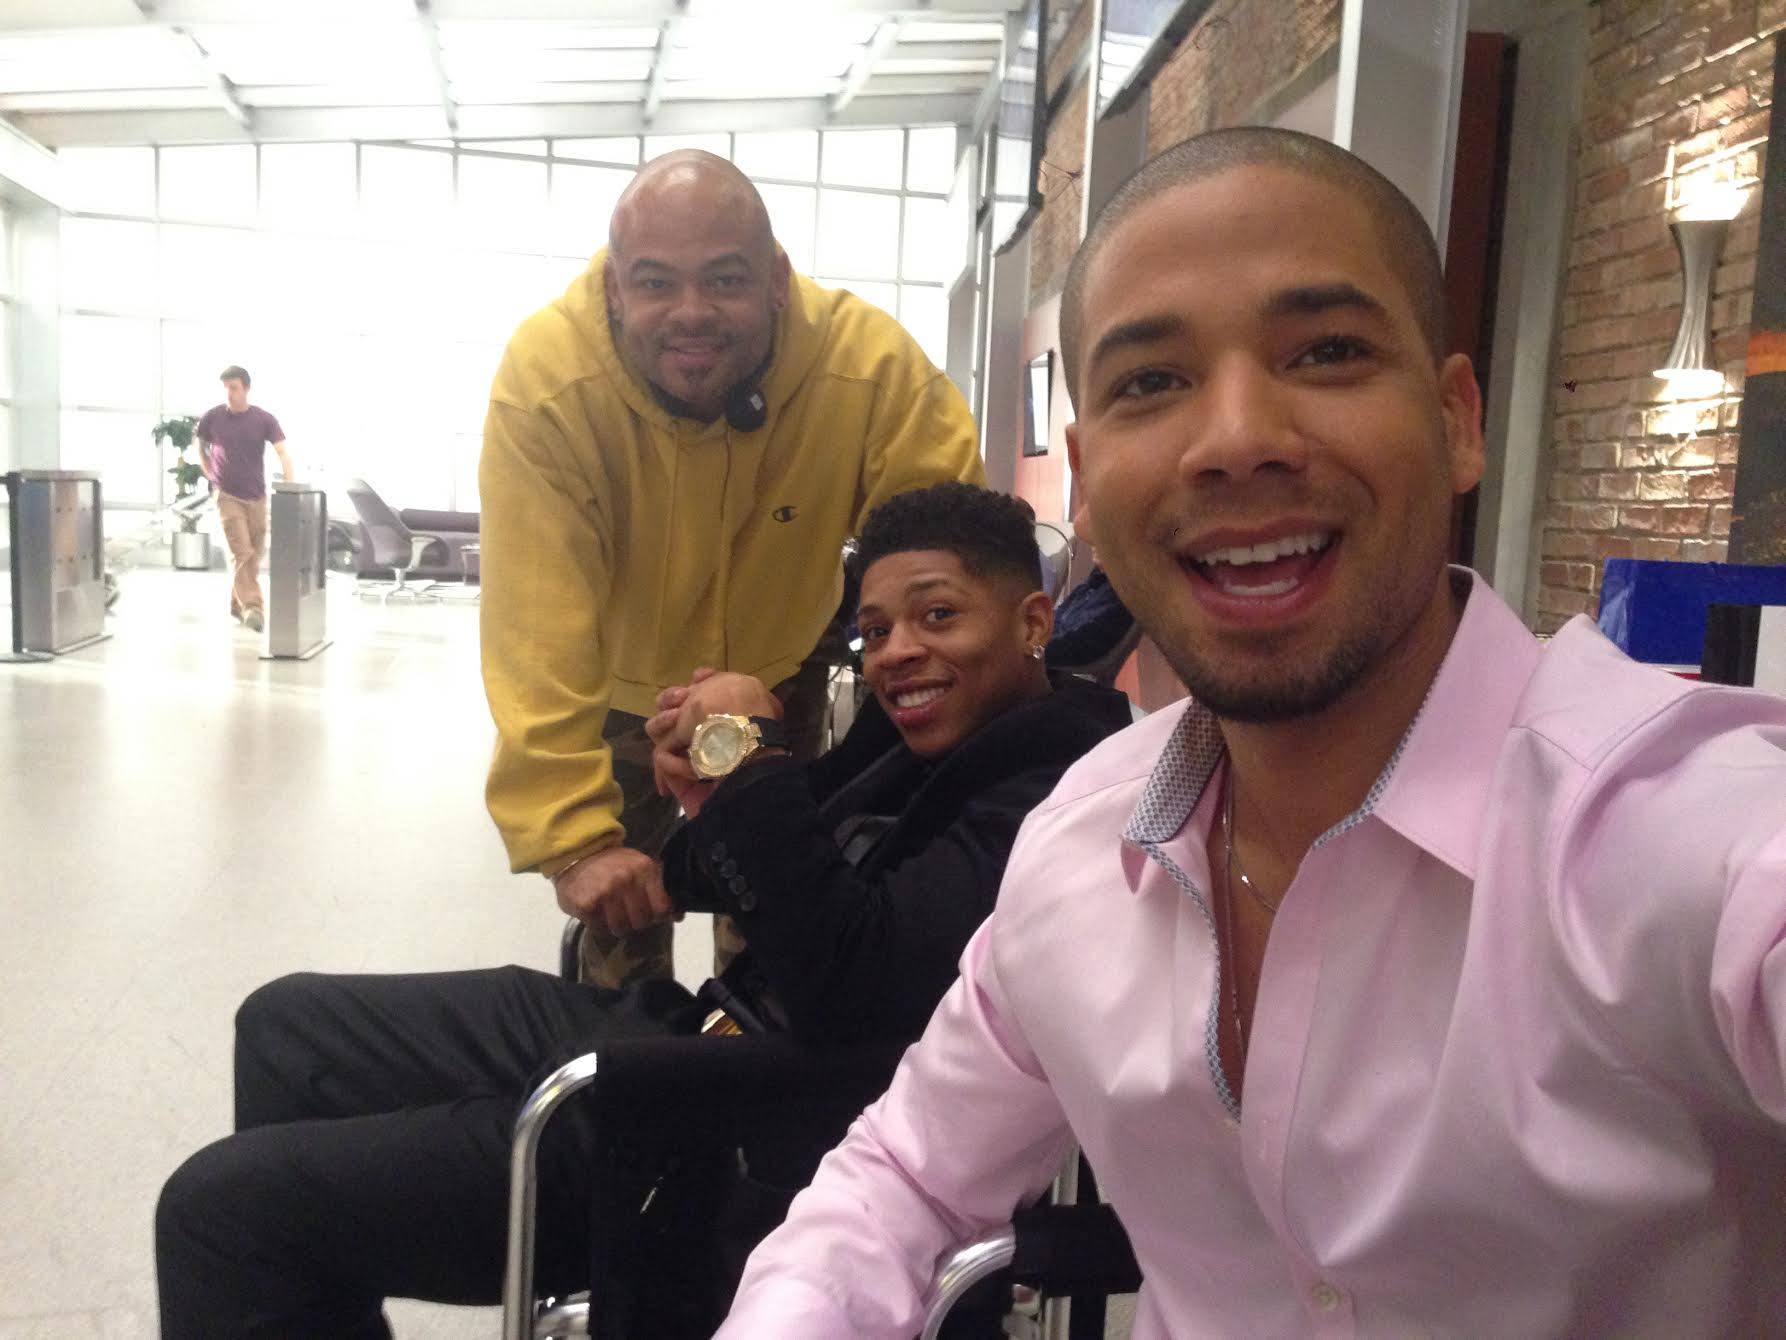 Anthony Hemingway, who directed episode 109, between takes with Bryshere Gray (Yaz the Greatest) and Jussie Smollett.